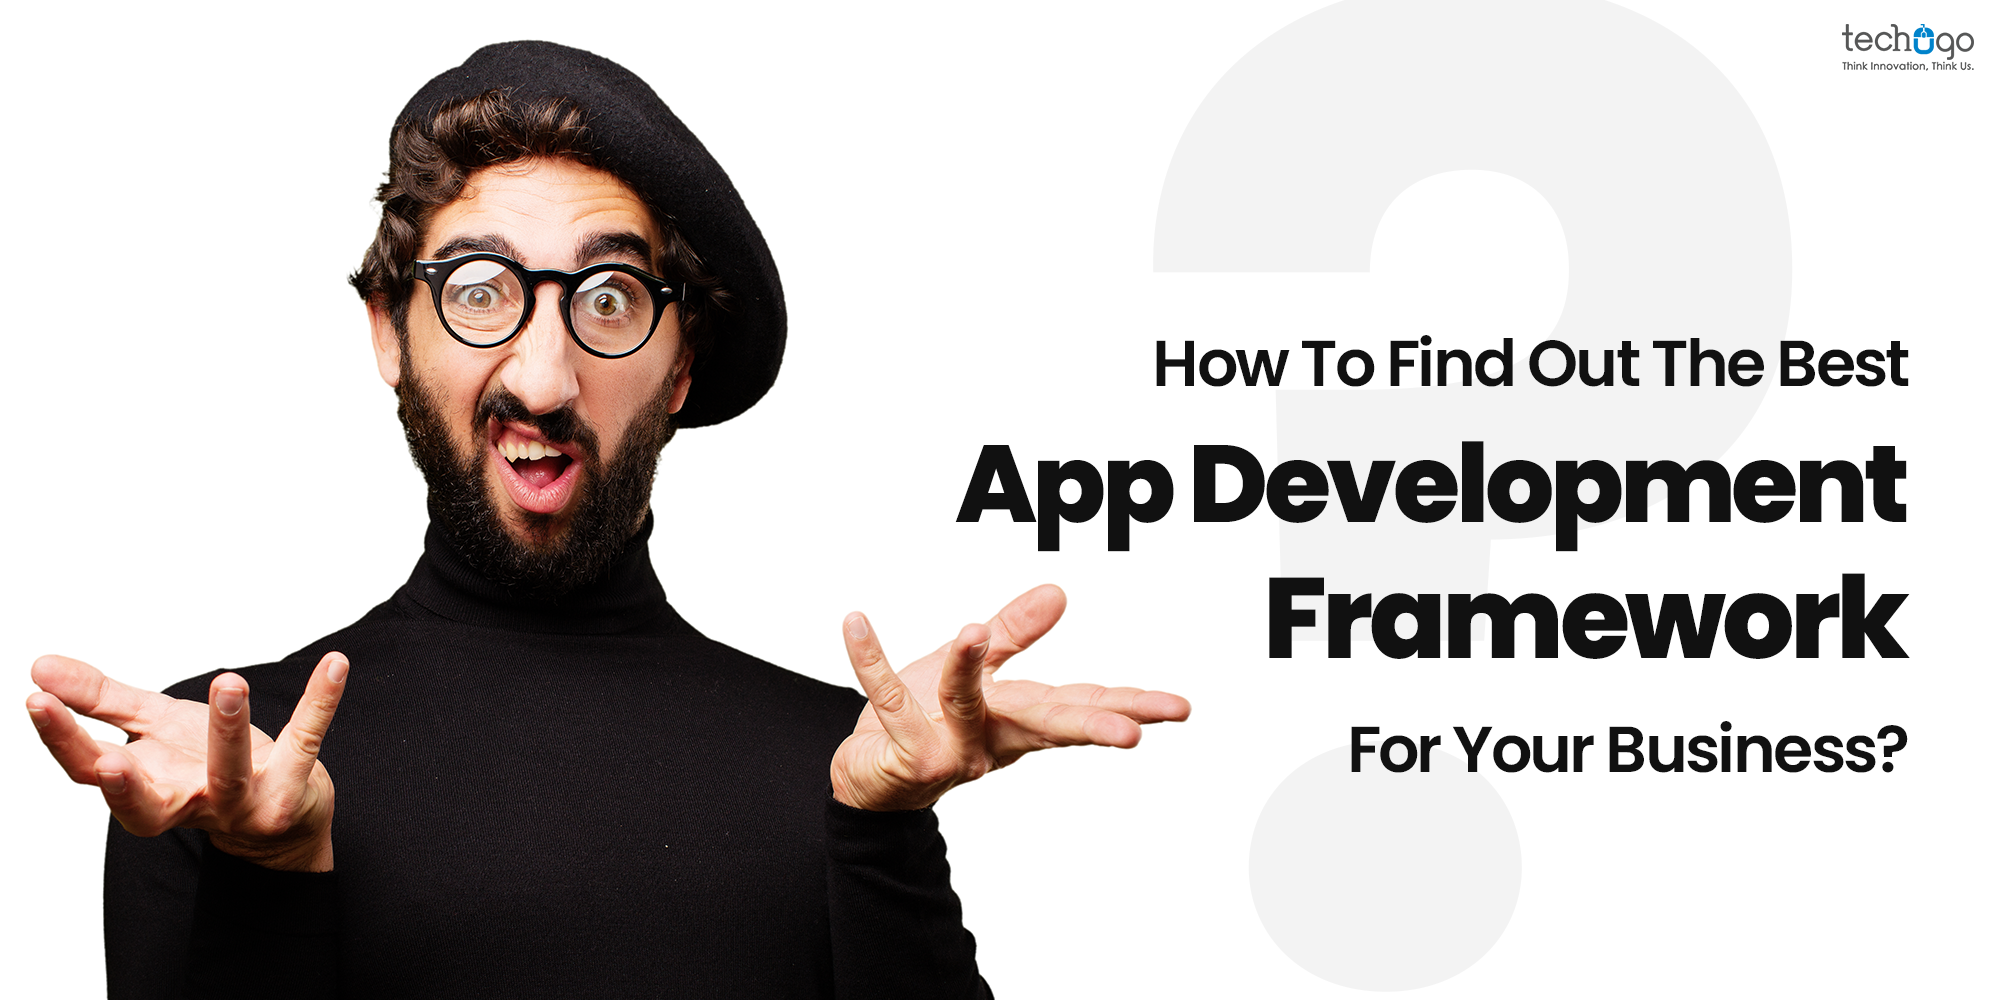 How To Find Out The Best App Development Framework For Your Business?